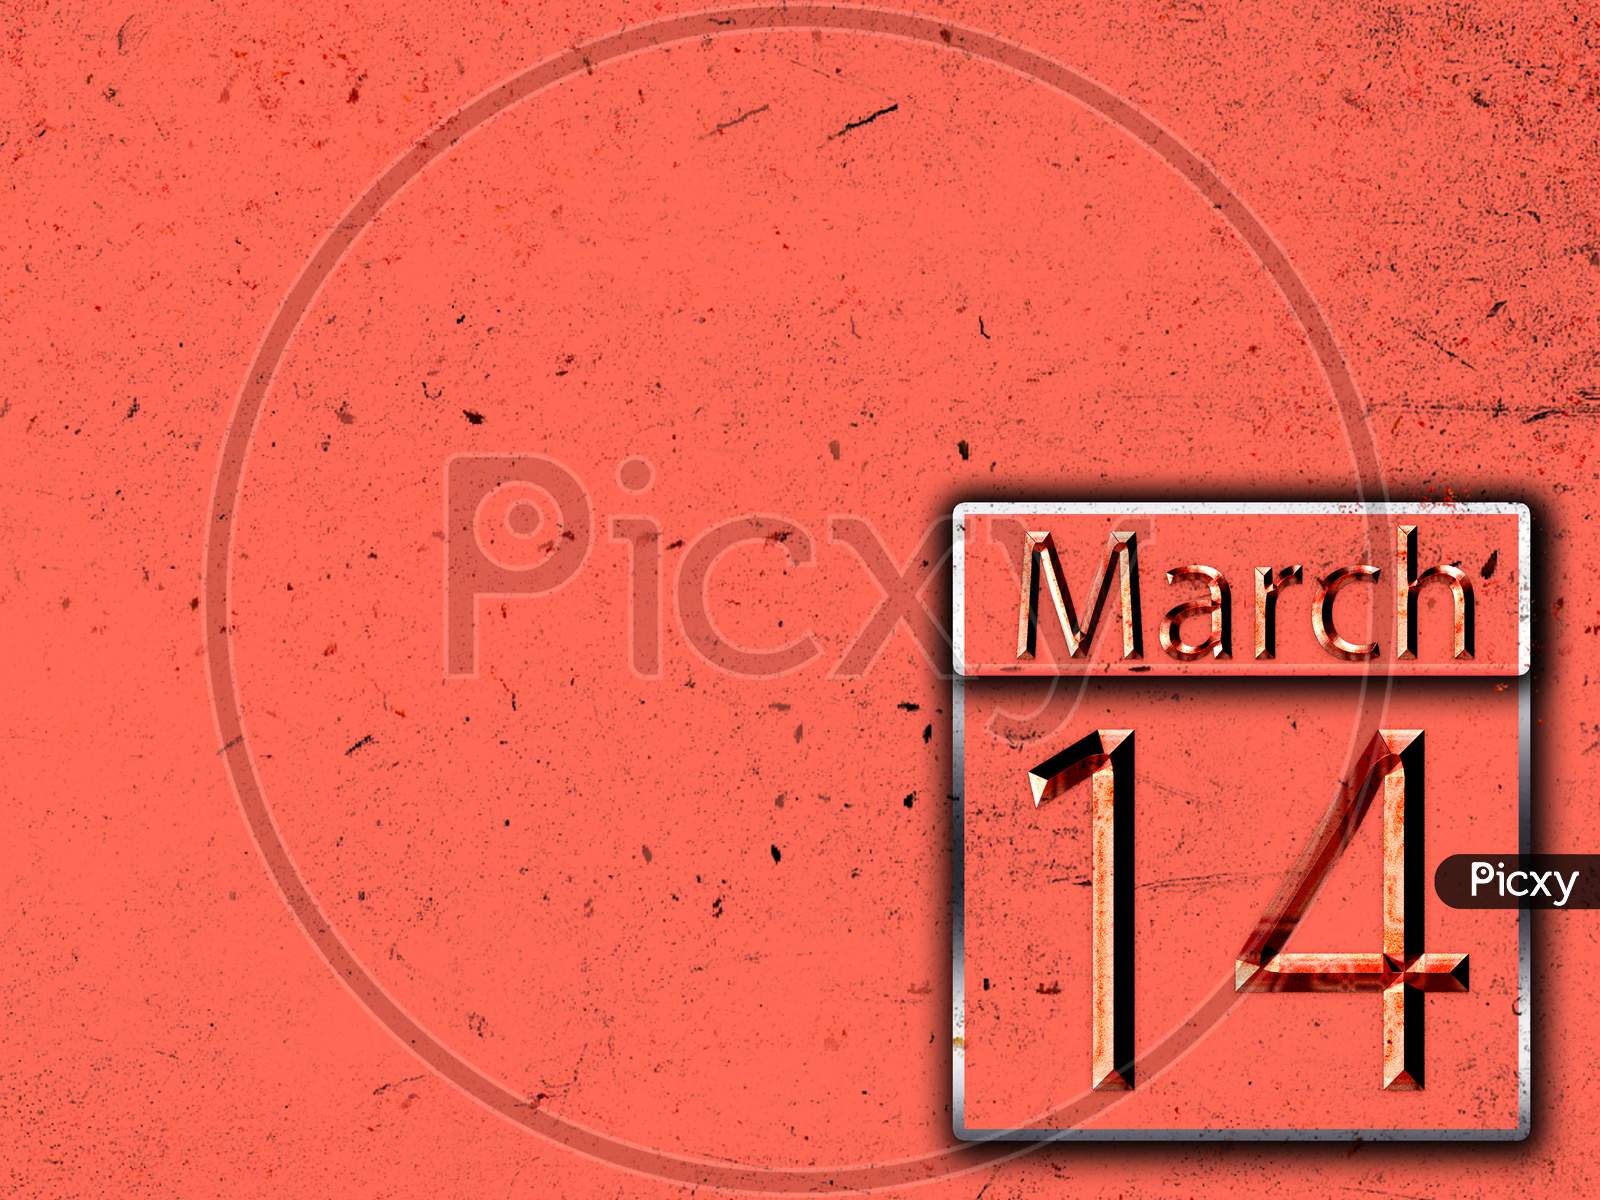 14 March, Monthly Calendar On Backgrand